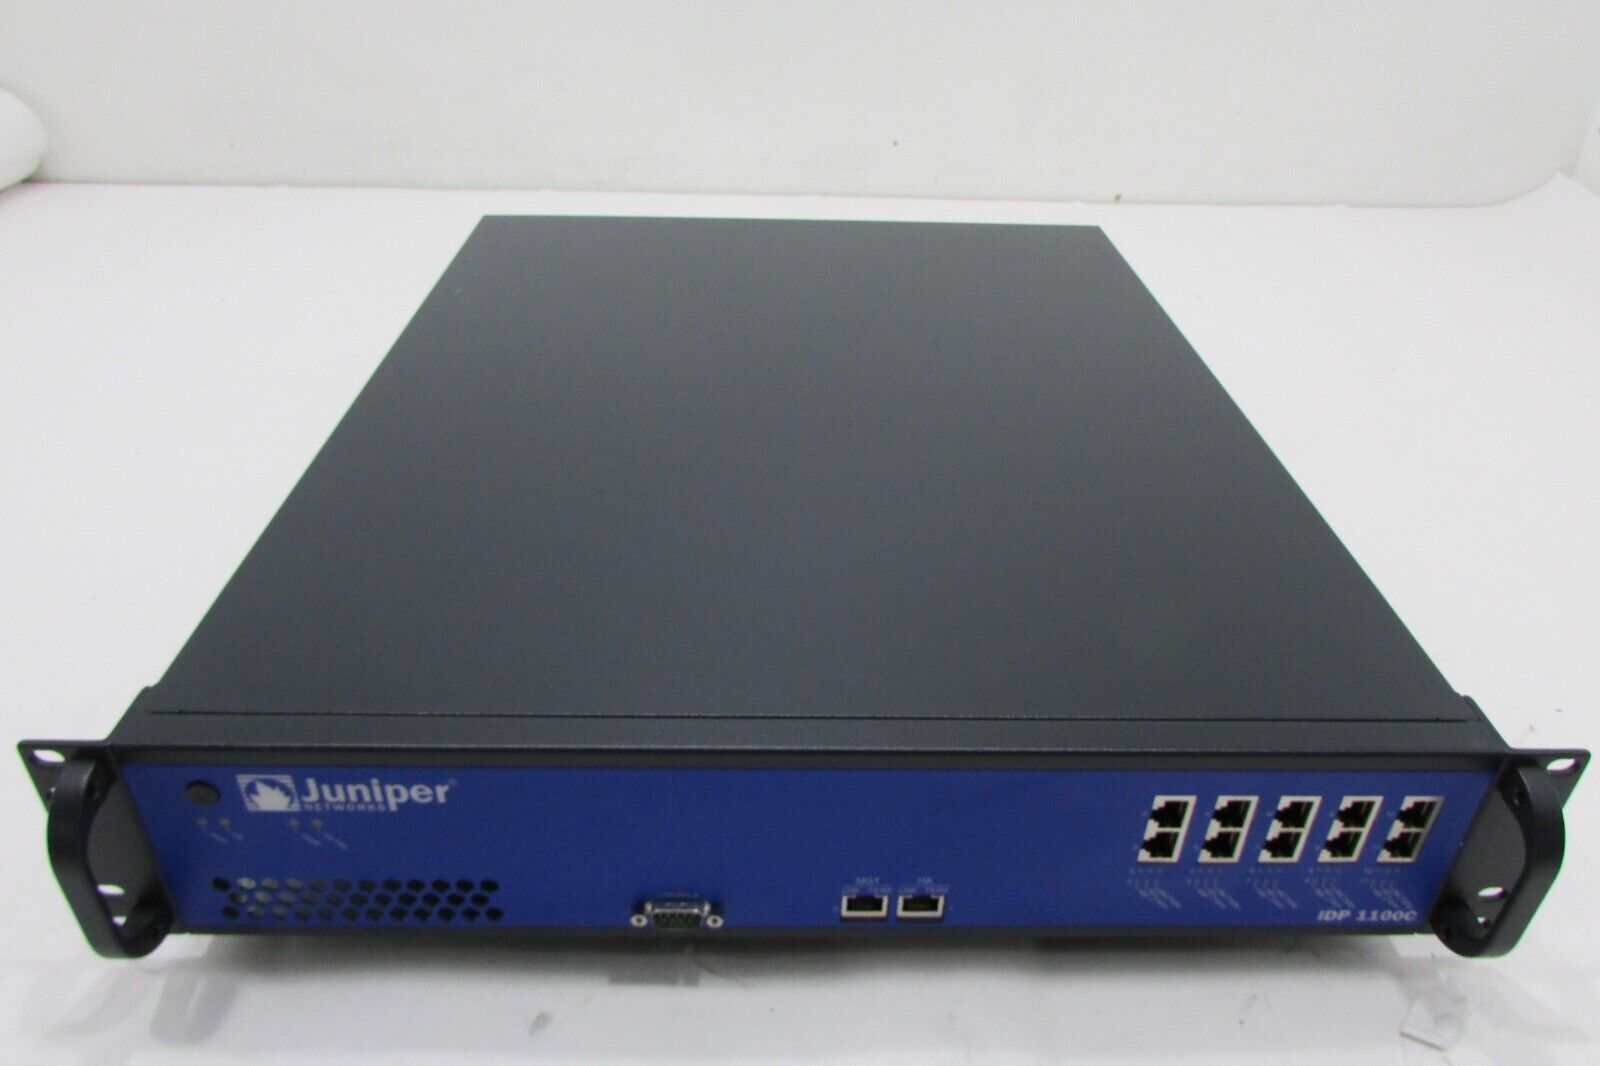 Juniper NS-IDP-1100C Intrusion Detection and Prevention